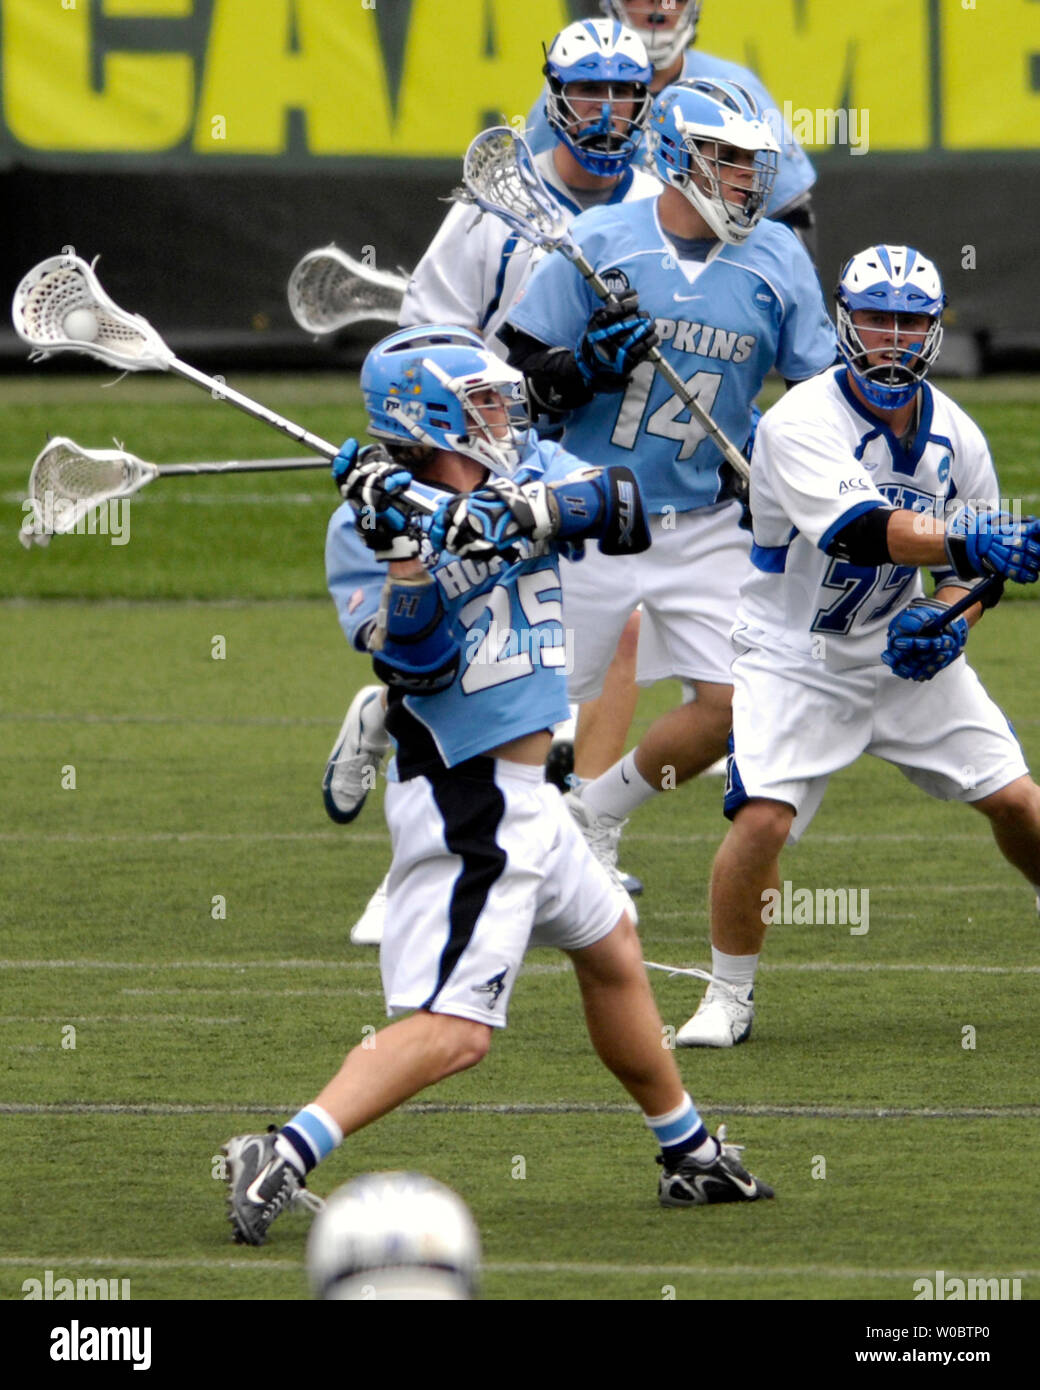 Johns Hopkins attacker Jake Byrne (25) shoots and scores in the second quarter against the Duke University Blue Devils in the NCAA Division I Championship of the lacrosse championship at M&T Bank Stadium in Baltimore, Maryland on on May 28, 2007.  (UPI Photo/ Mark Goldman) Stock Photo